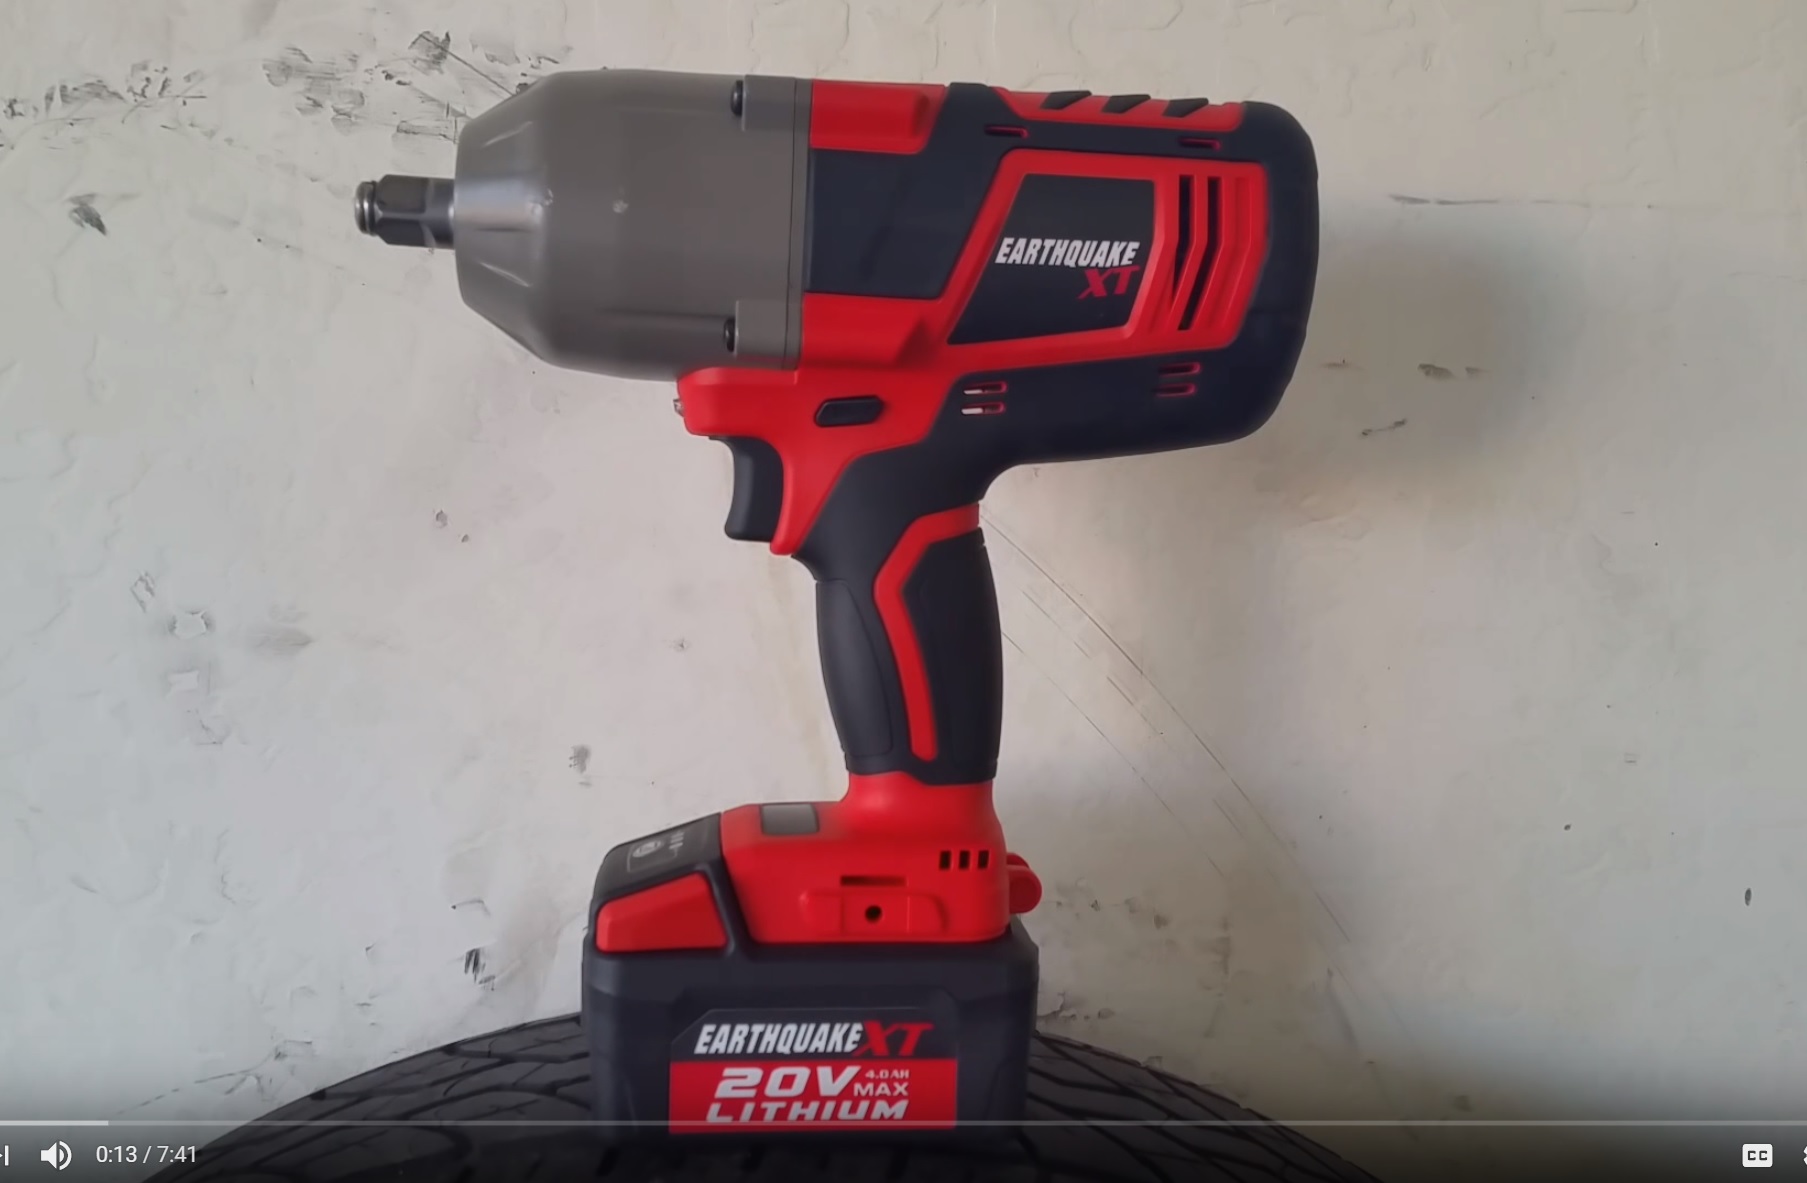 Earthquake XT 20V 1/2" Impact Wrench Video Review - Tool Craze